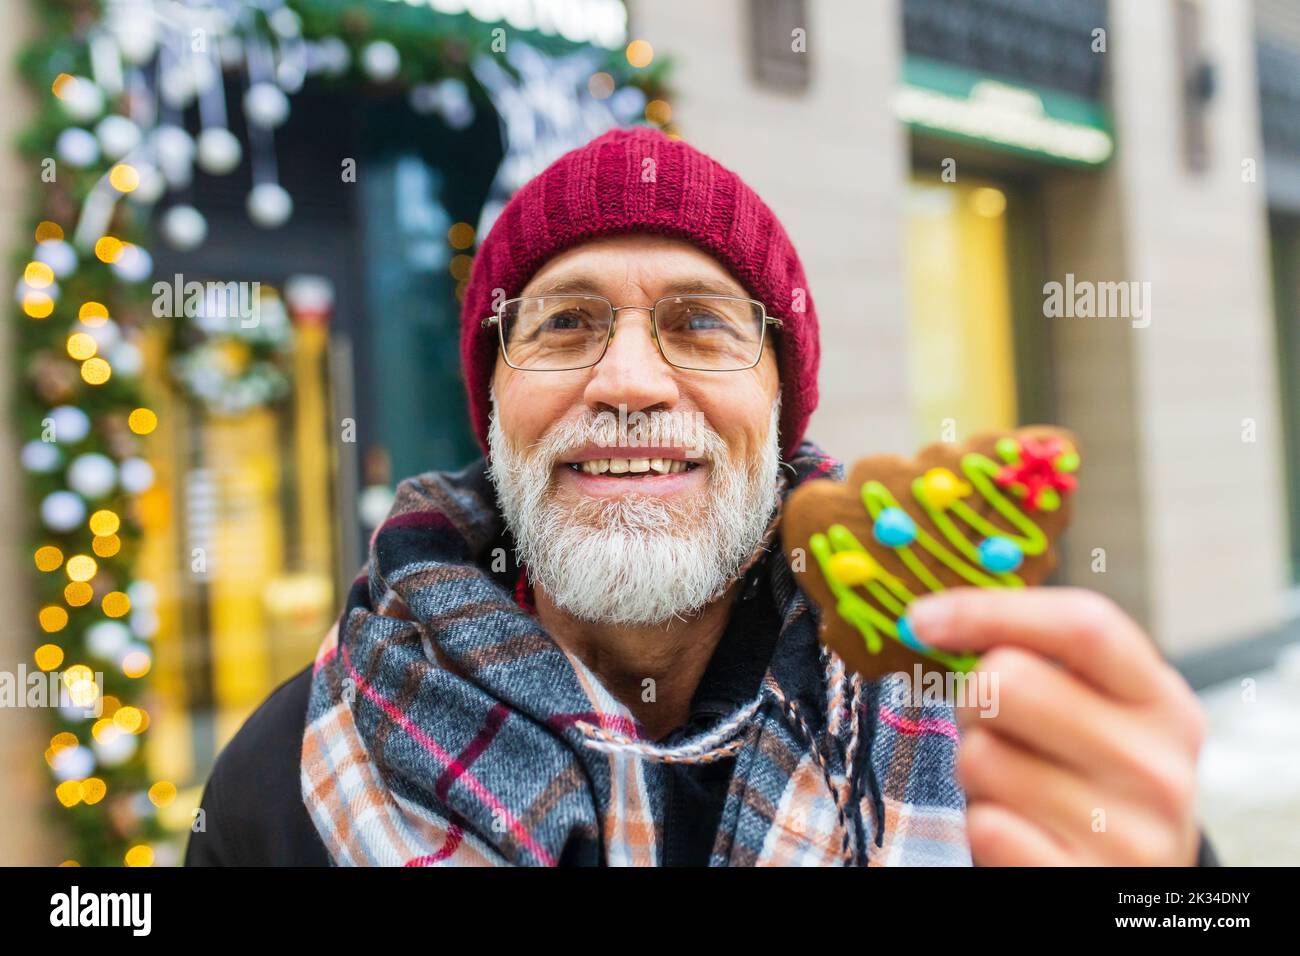 happy man showing green sweet cookie christmas tree shape outdoors in winter market Stock Photo